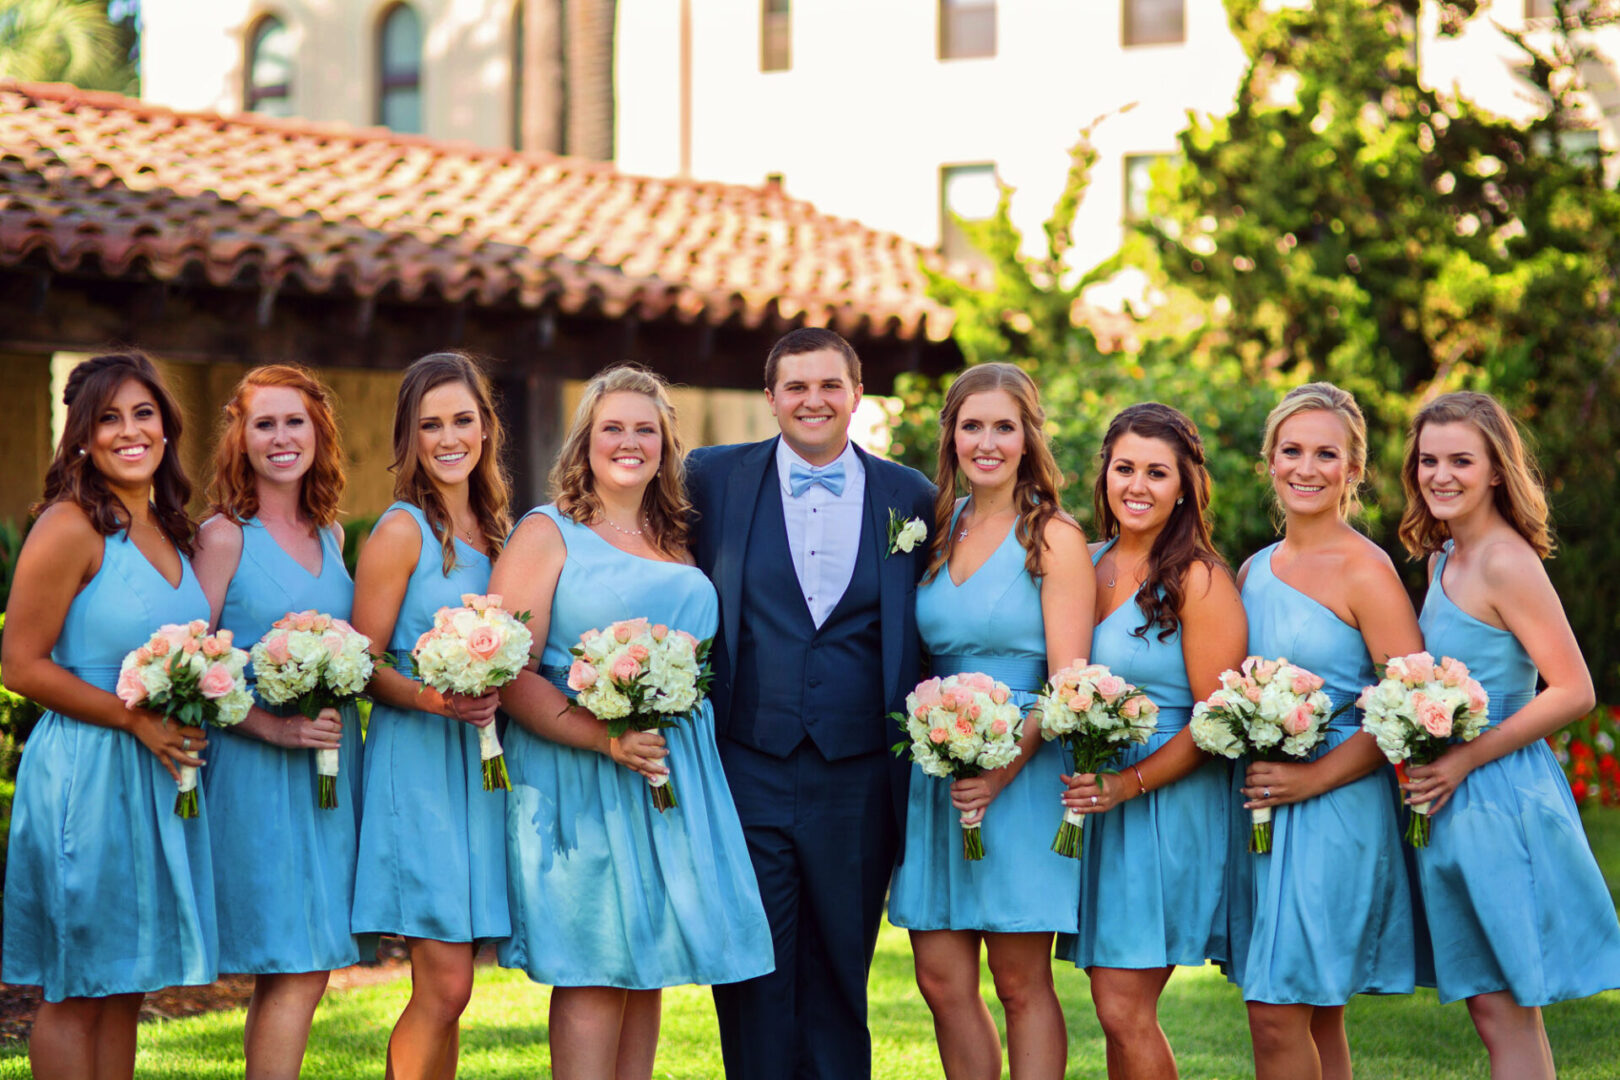 A groom standing with some ladies